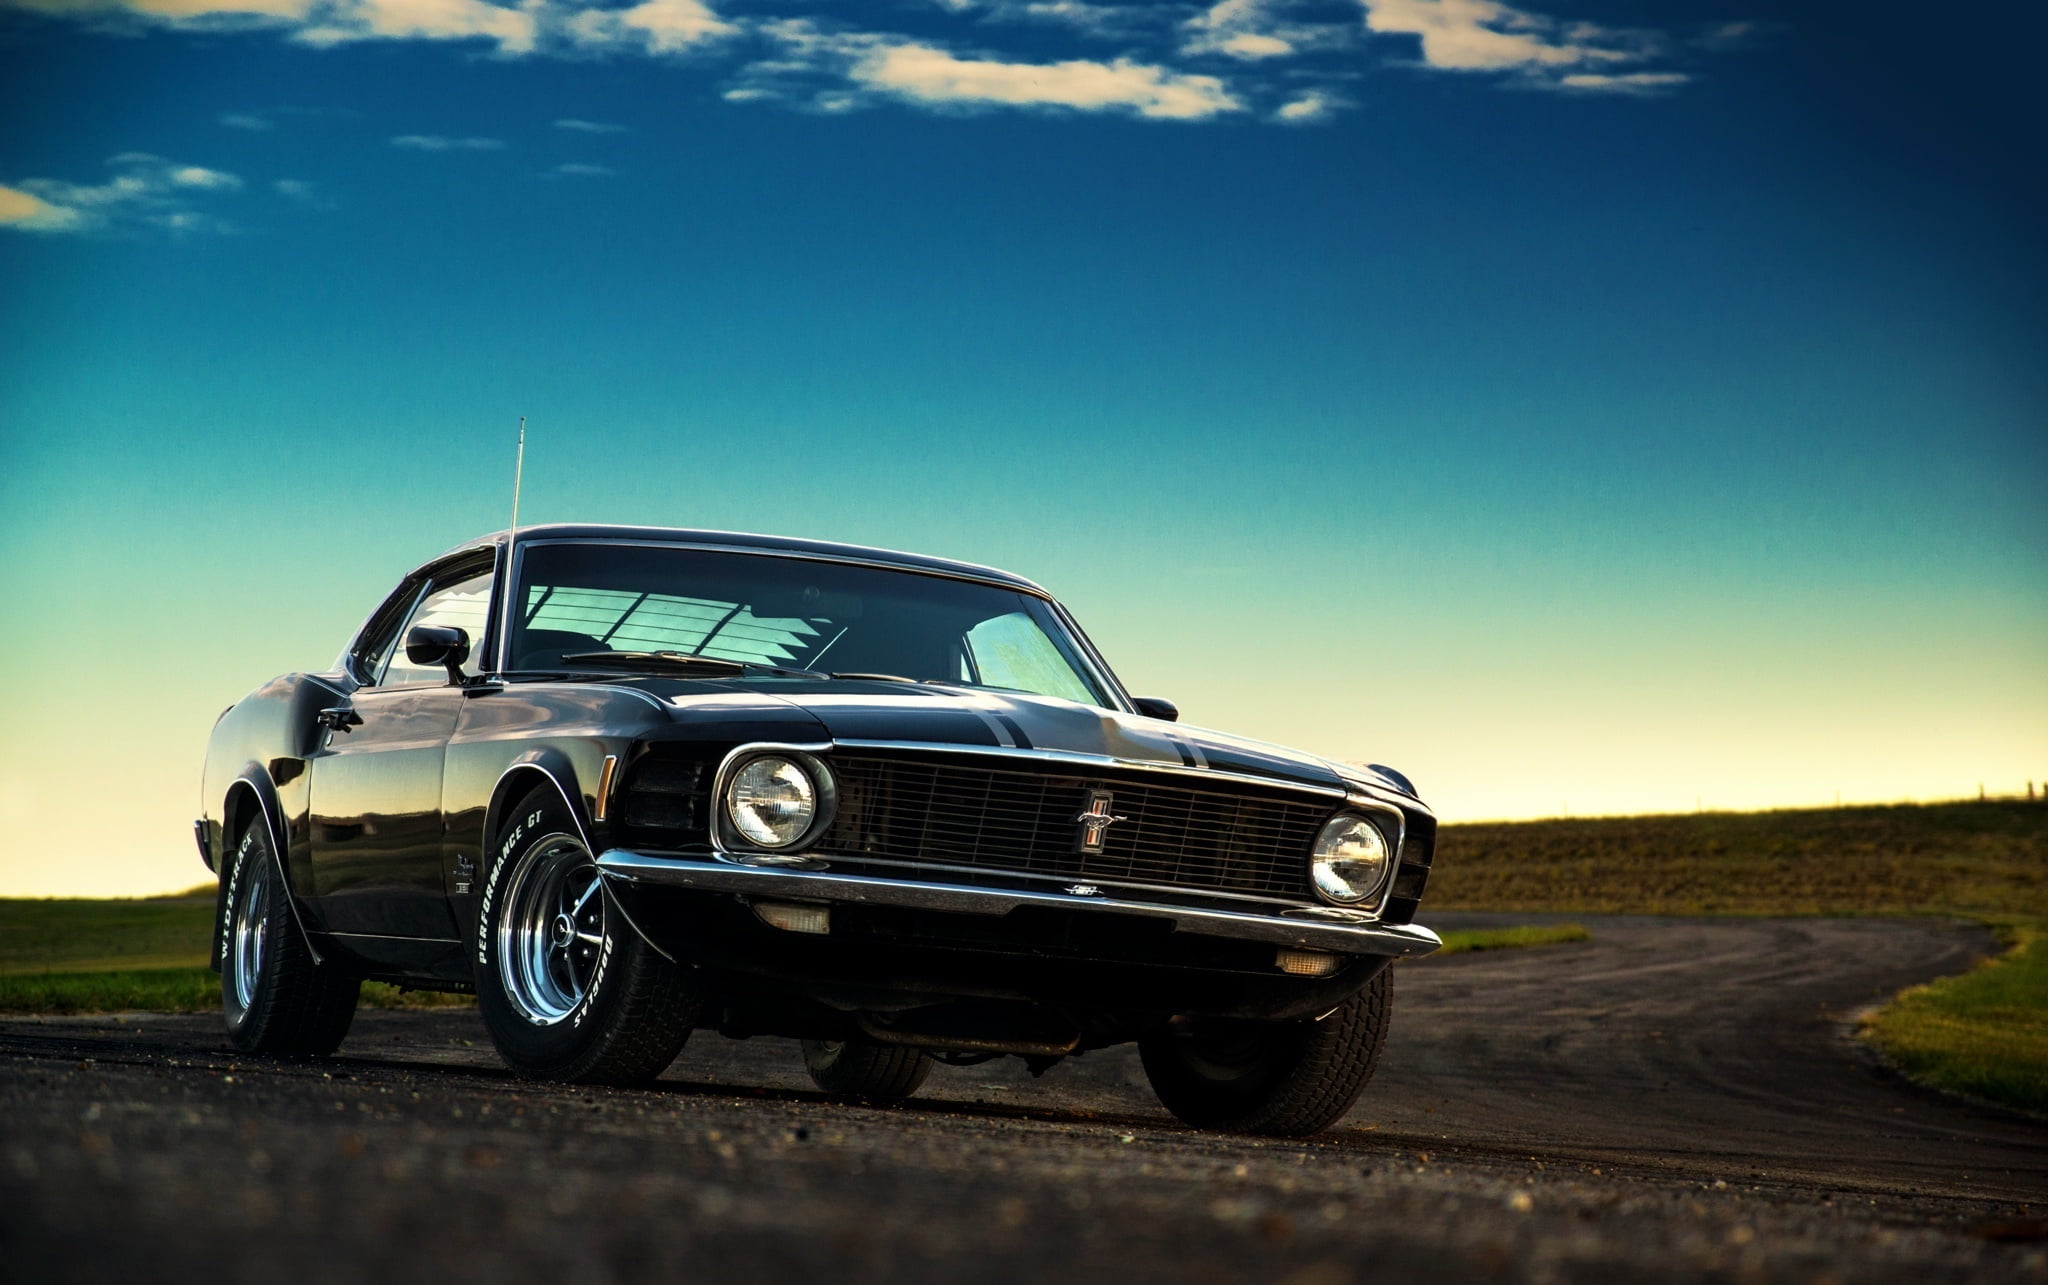 Mustang, Ford, Muscle, Car, Classic, Black, Sunset, 1970, American